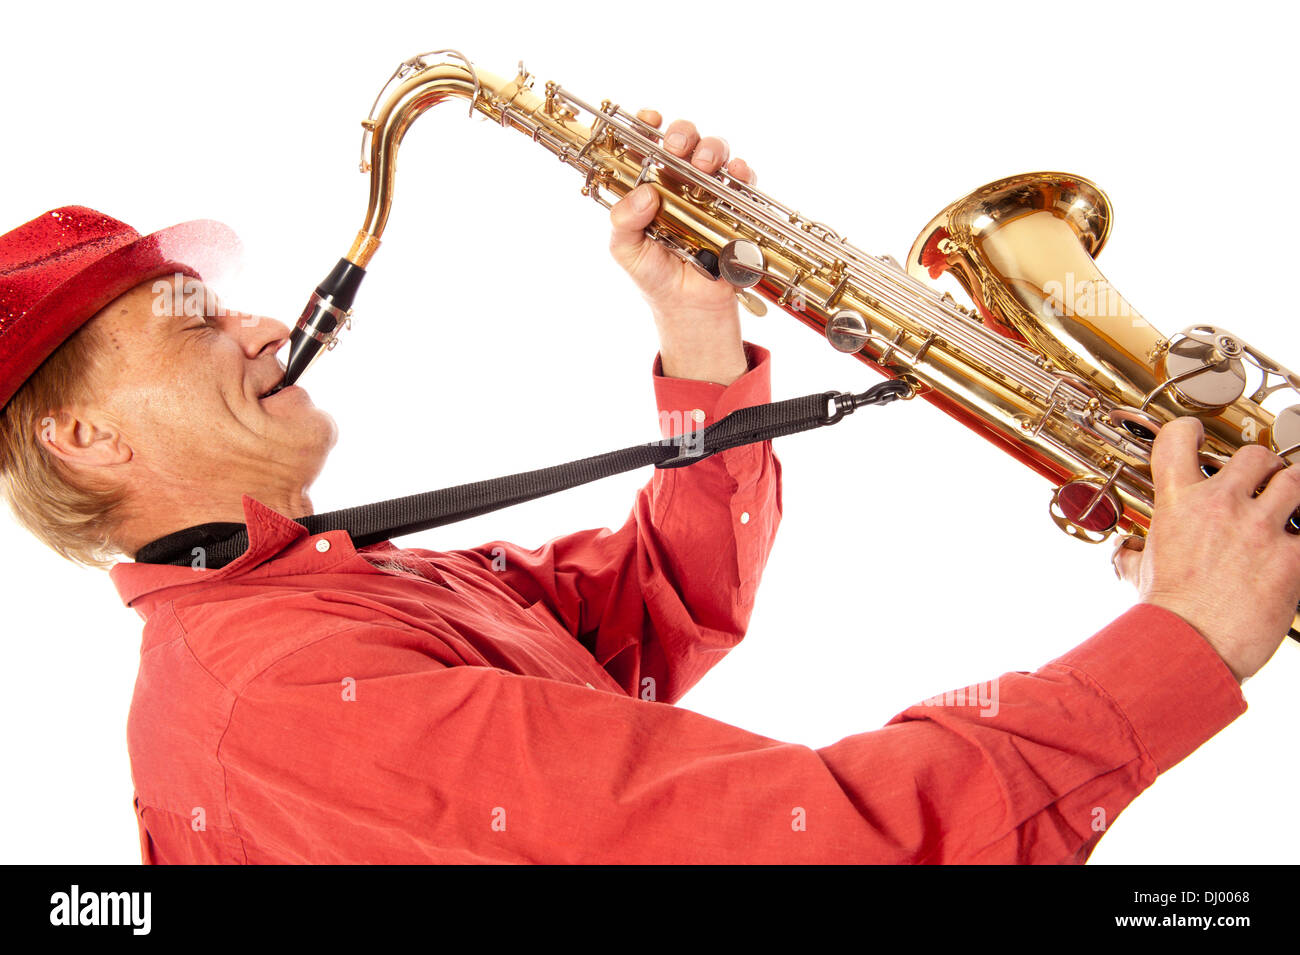 Male performer playing a brass tenor saxophone with silver valves and pearl  buttons with expression Stock Photo - Alamy